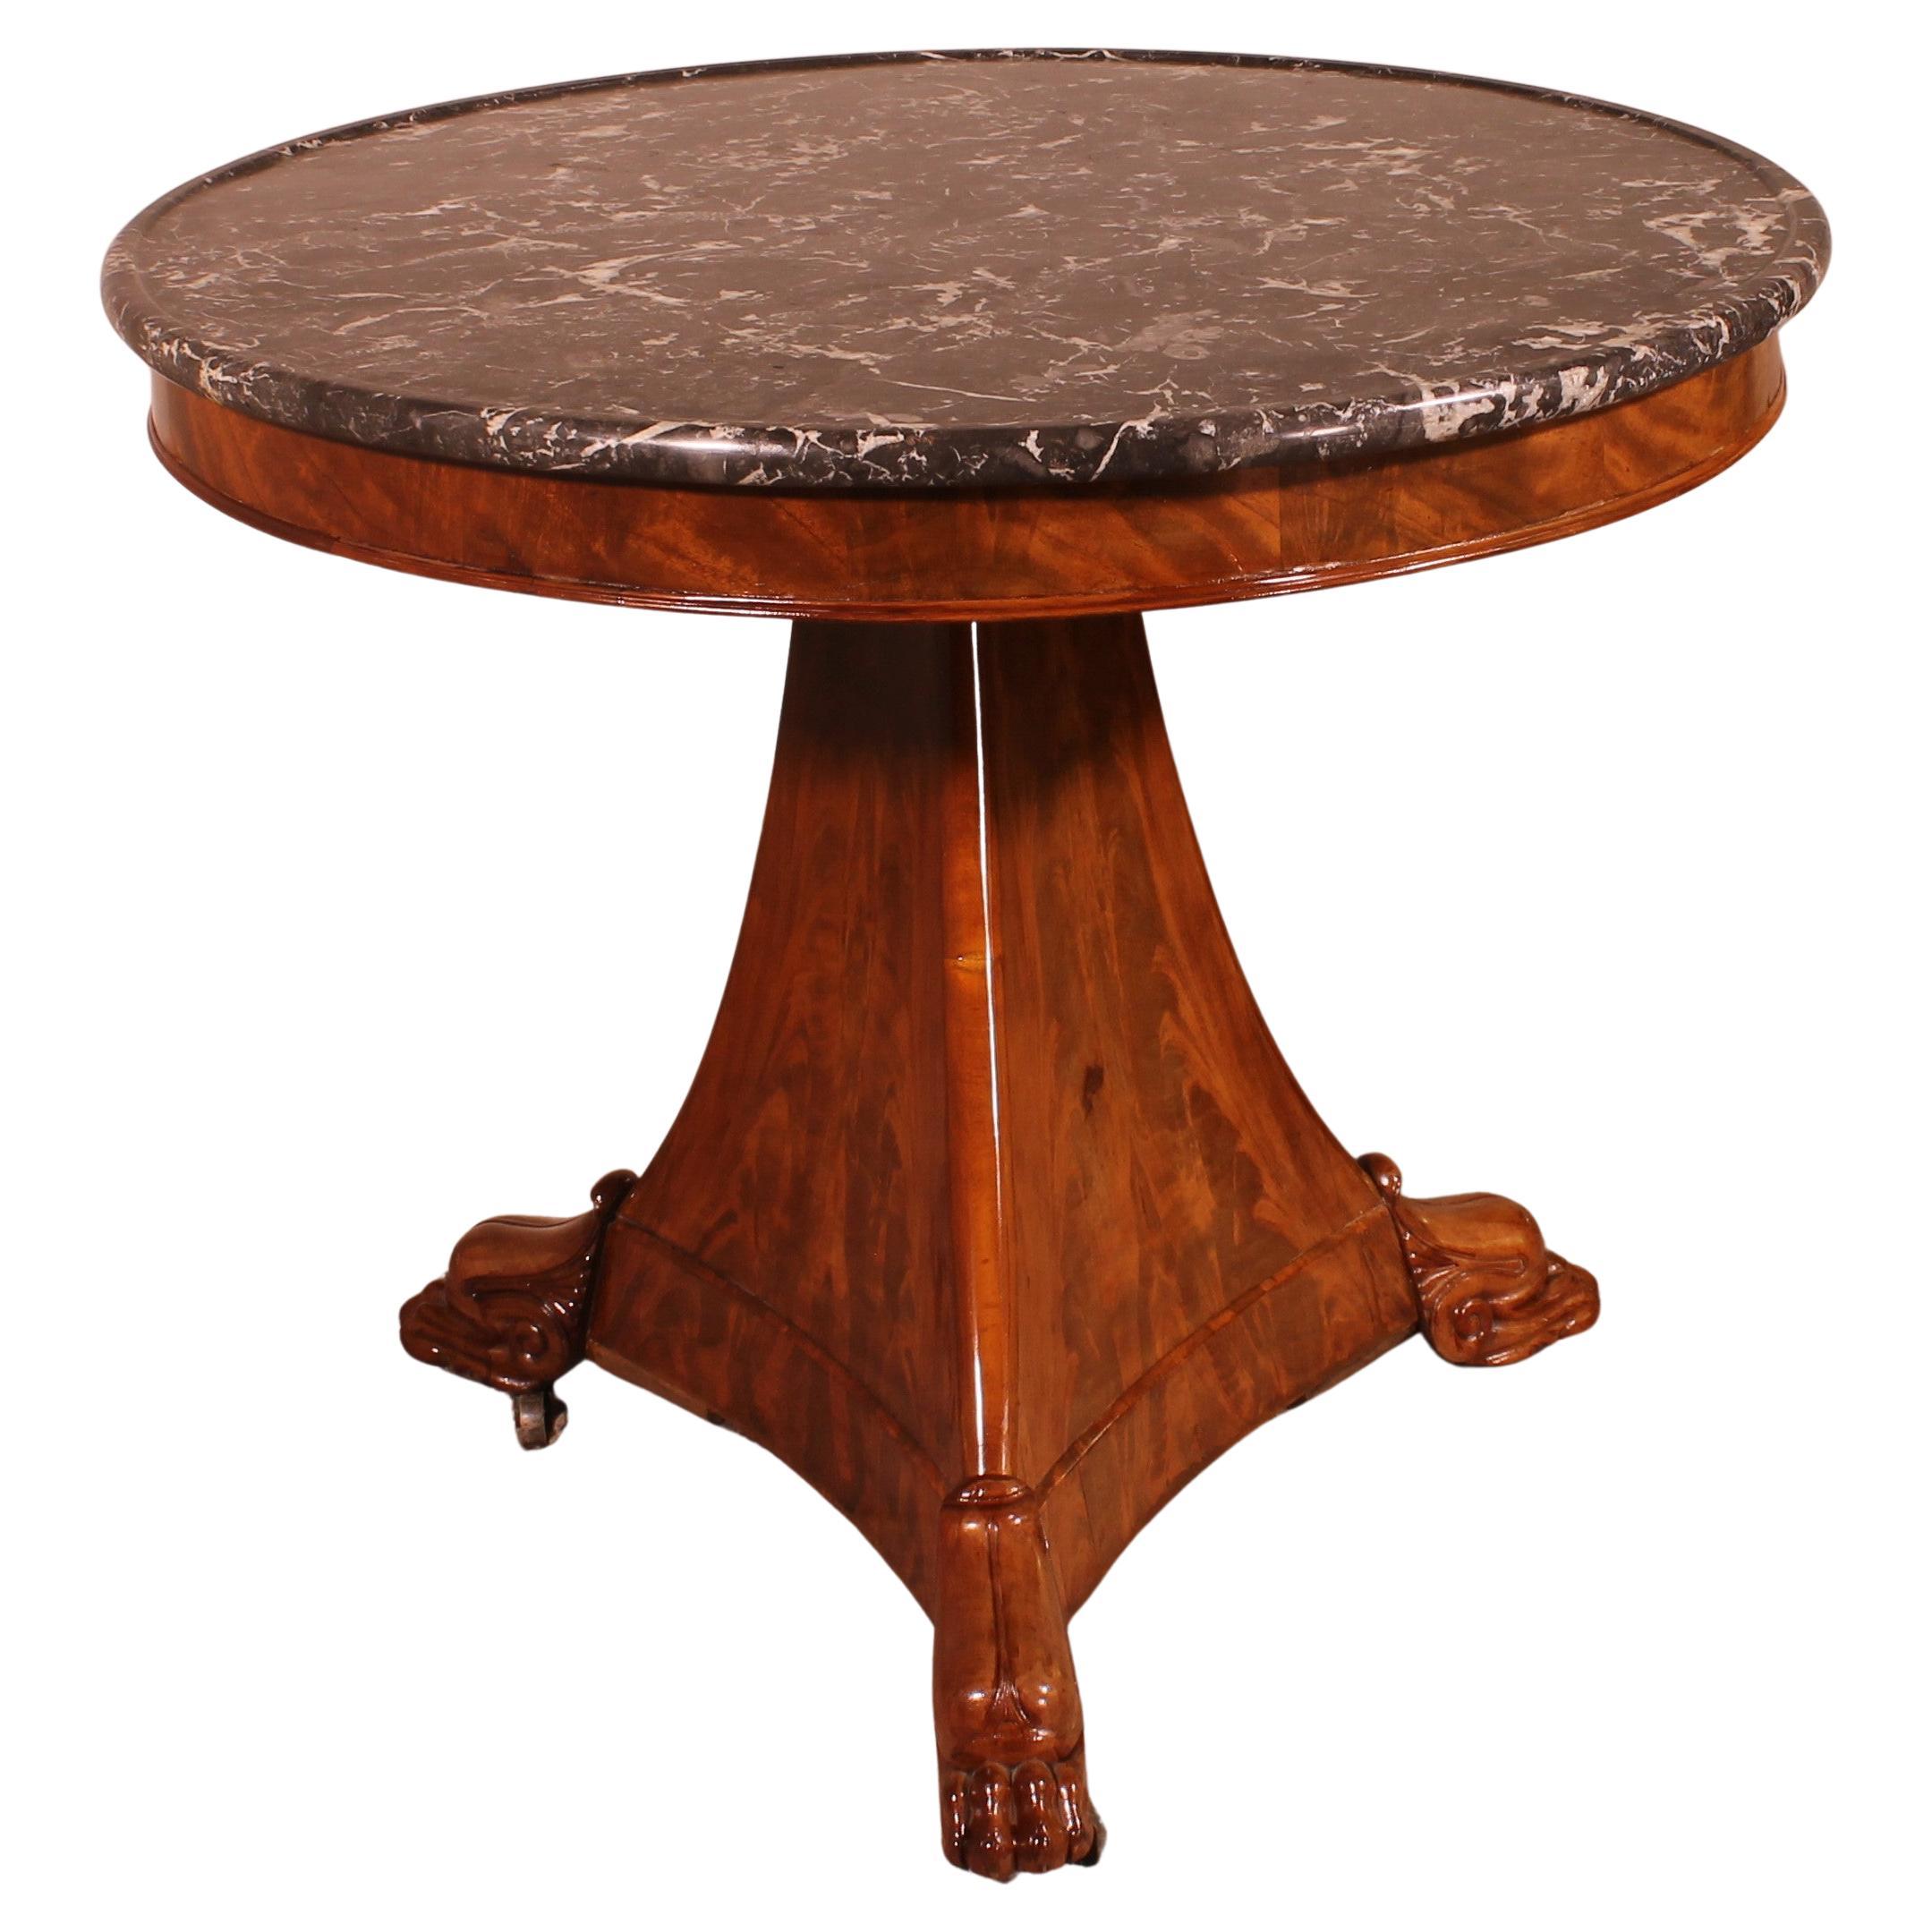 Empire Pedestal Table with Its Saint-Anne Marble For Sale